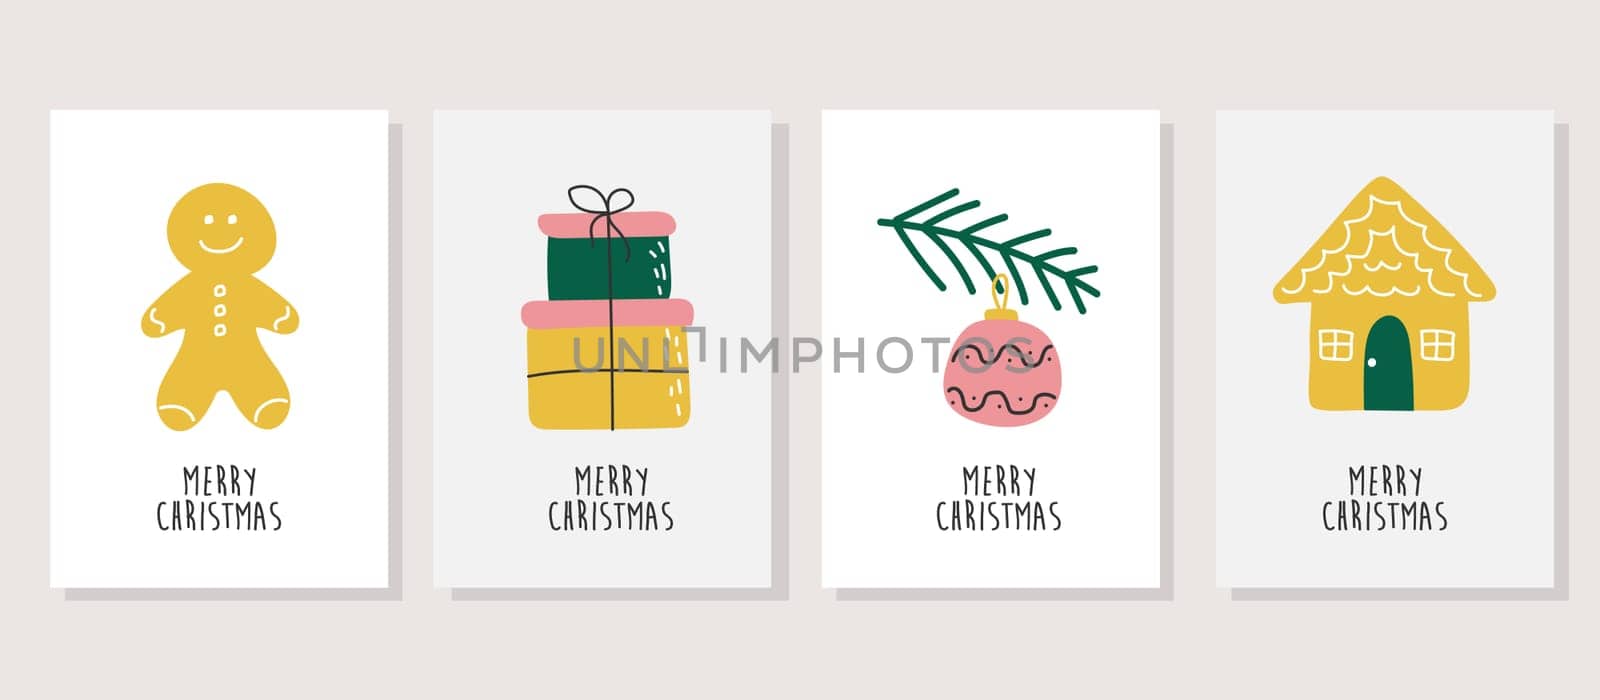 Hand drawn vector Merry Christmas cards collection set with cute illustrations by natali_brill